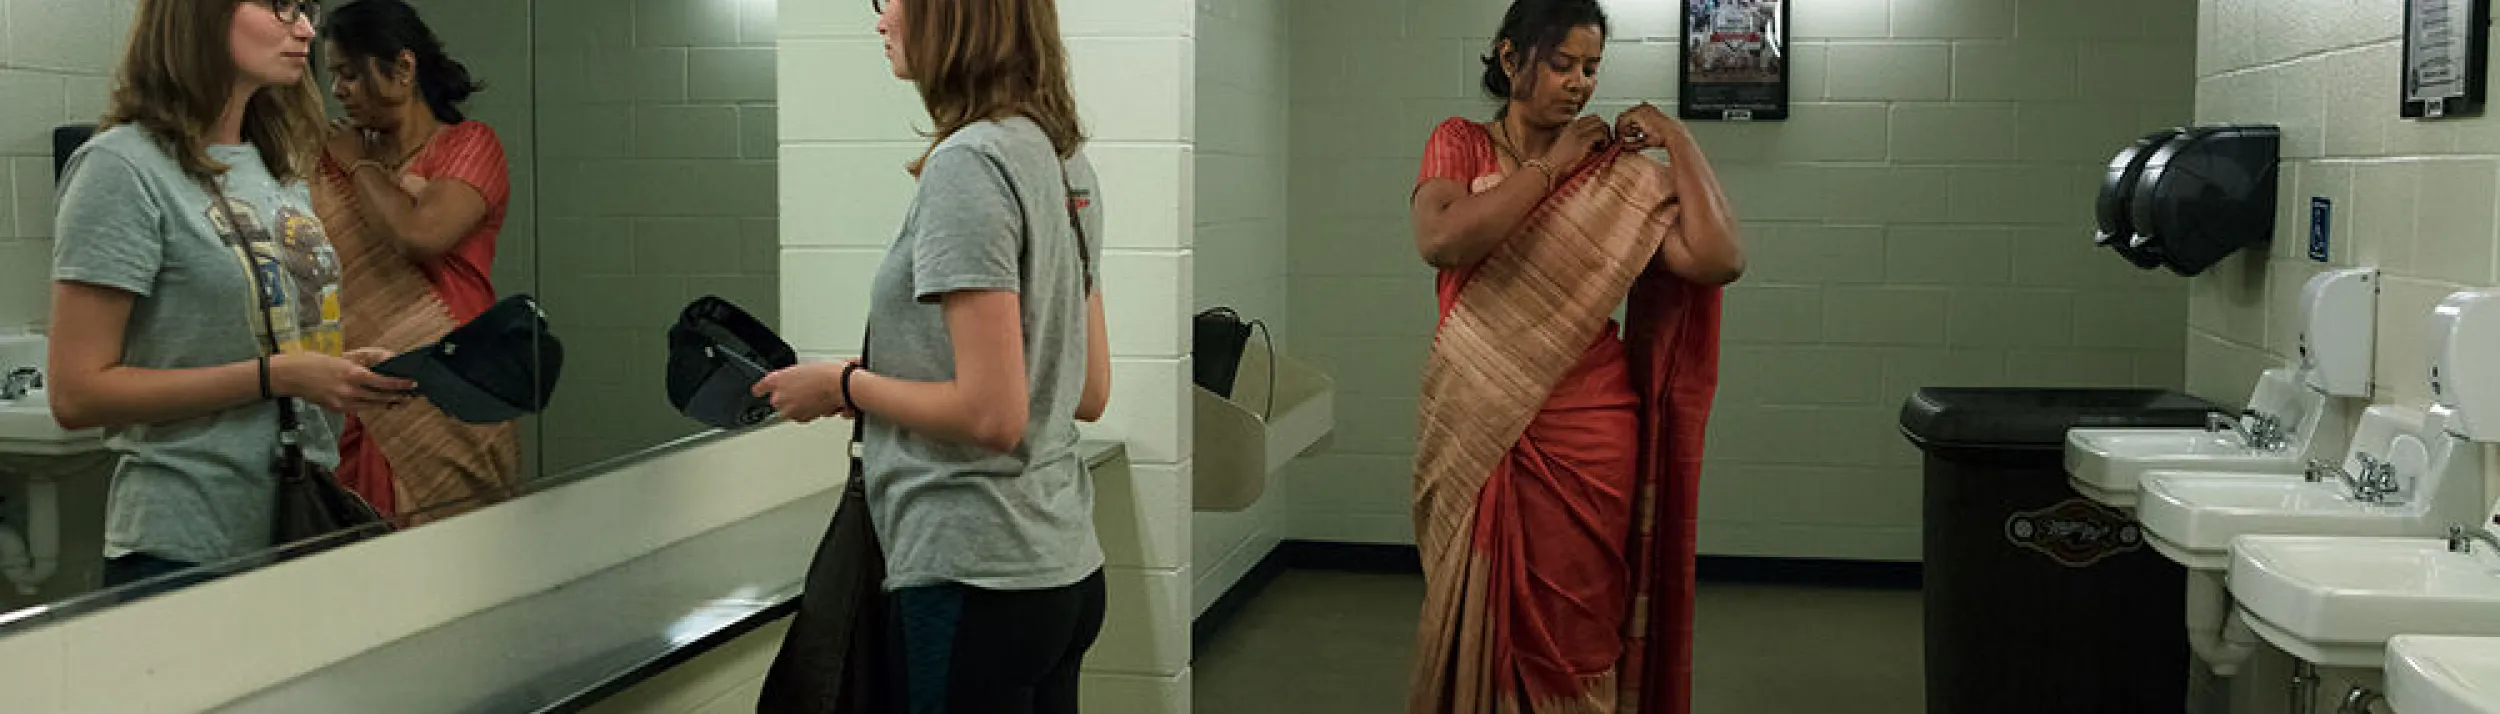 Two women in a public restroom. One is holding a baseball cap and looking in the mirror; the other is adjusting her sari.